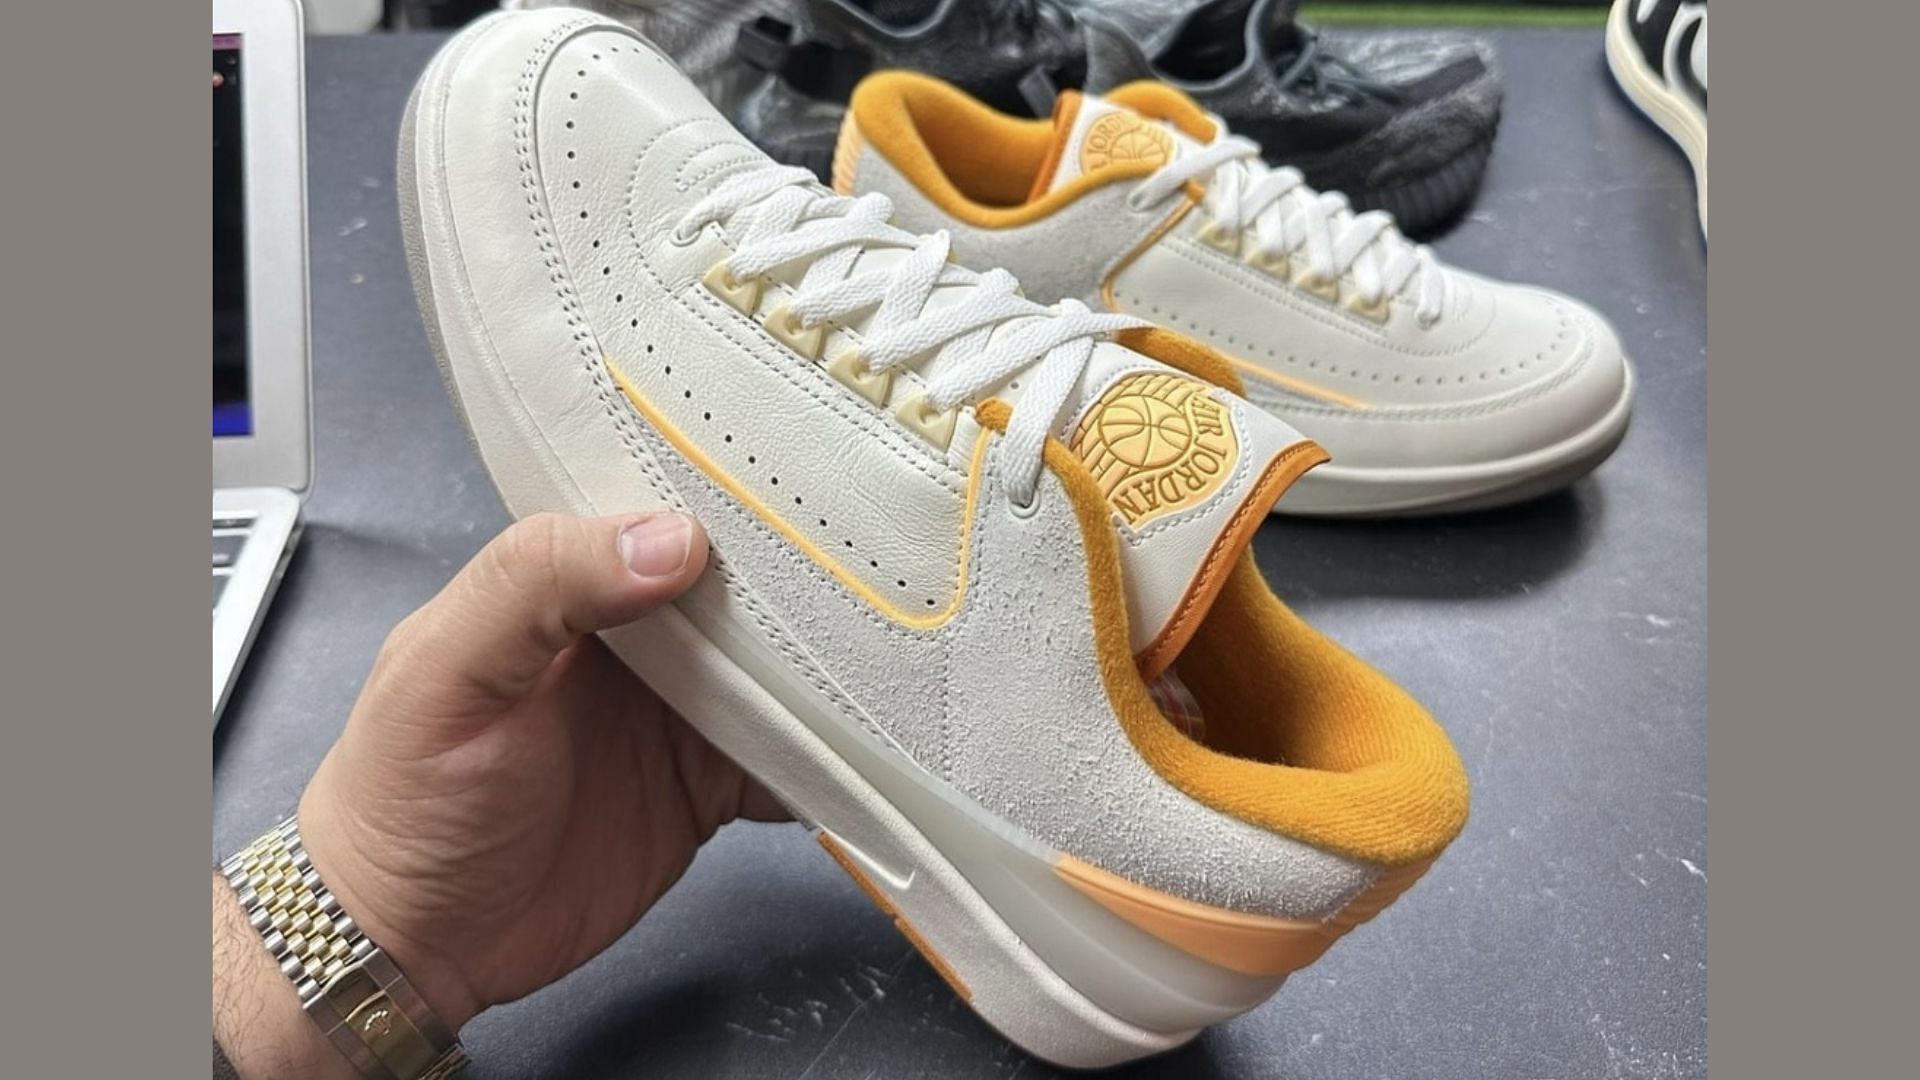 Early in-hand look at the Air Jordan 2 Low Craft shoes (Image via Instagram/@masterchefian)